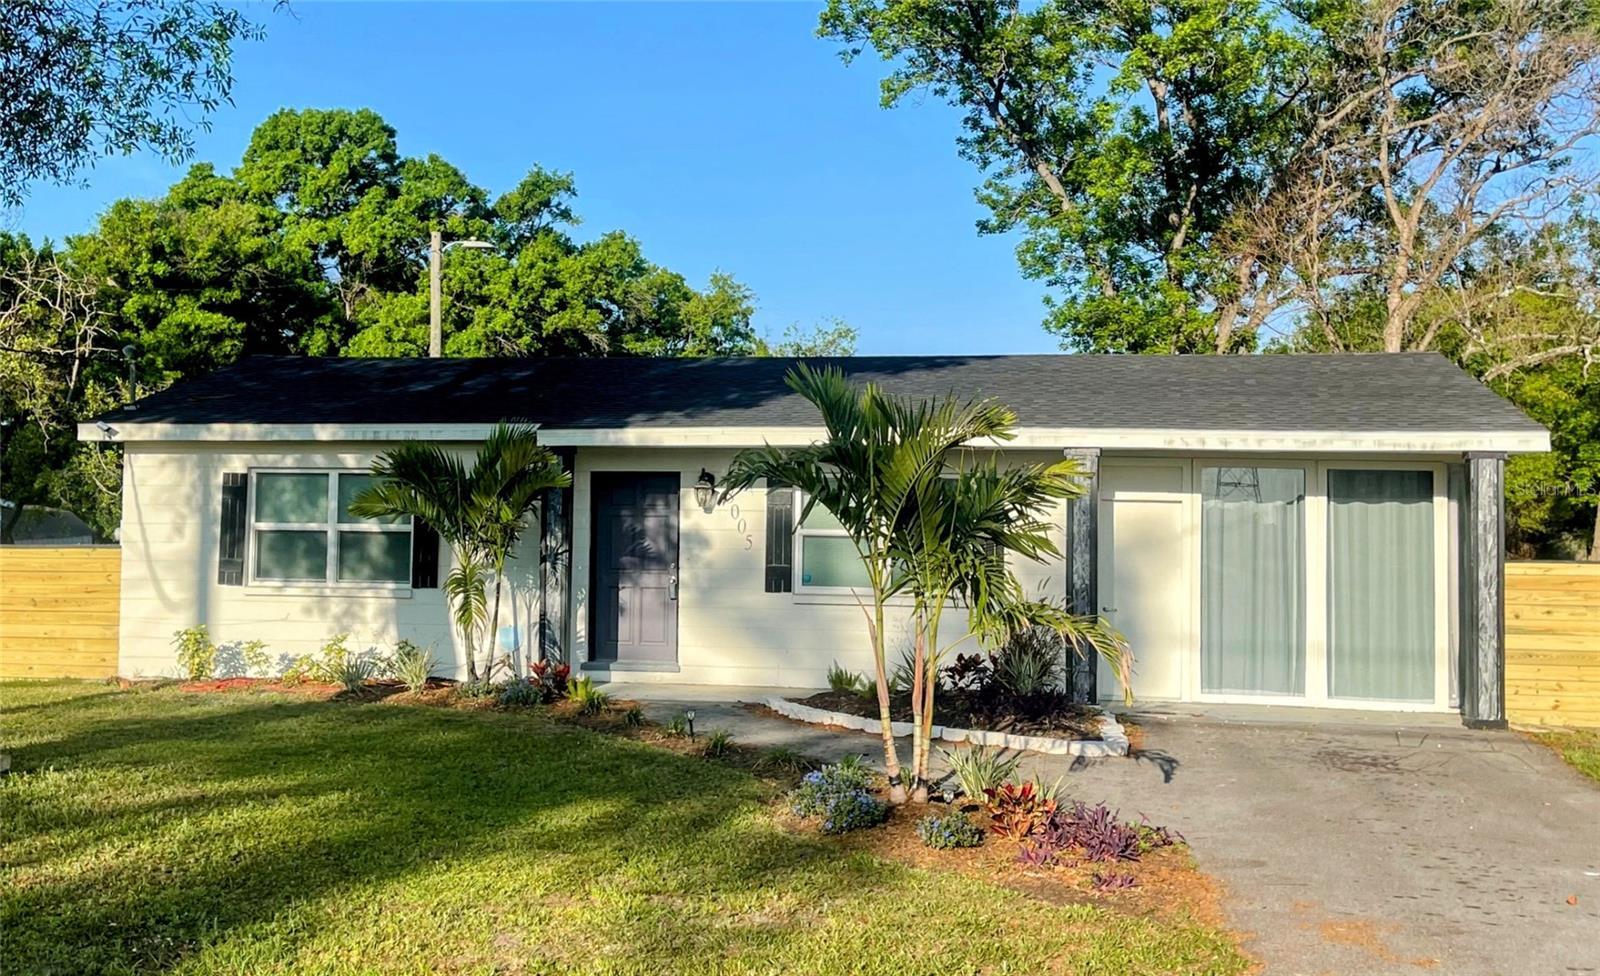 Photo one of 8005 S 78Th St Riverview FL 33578 | MLS T3473490